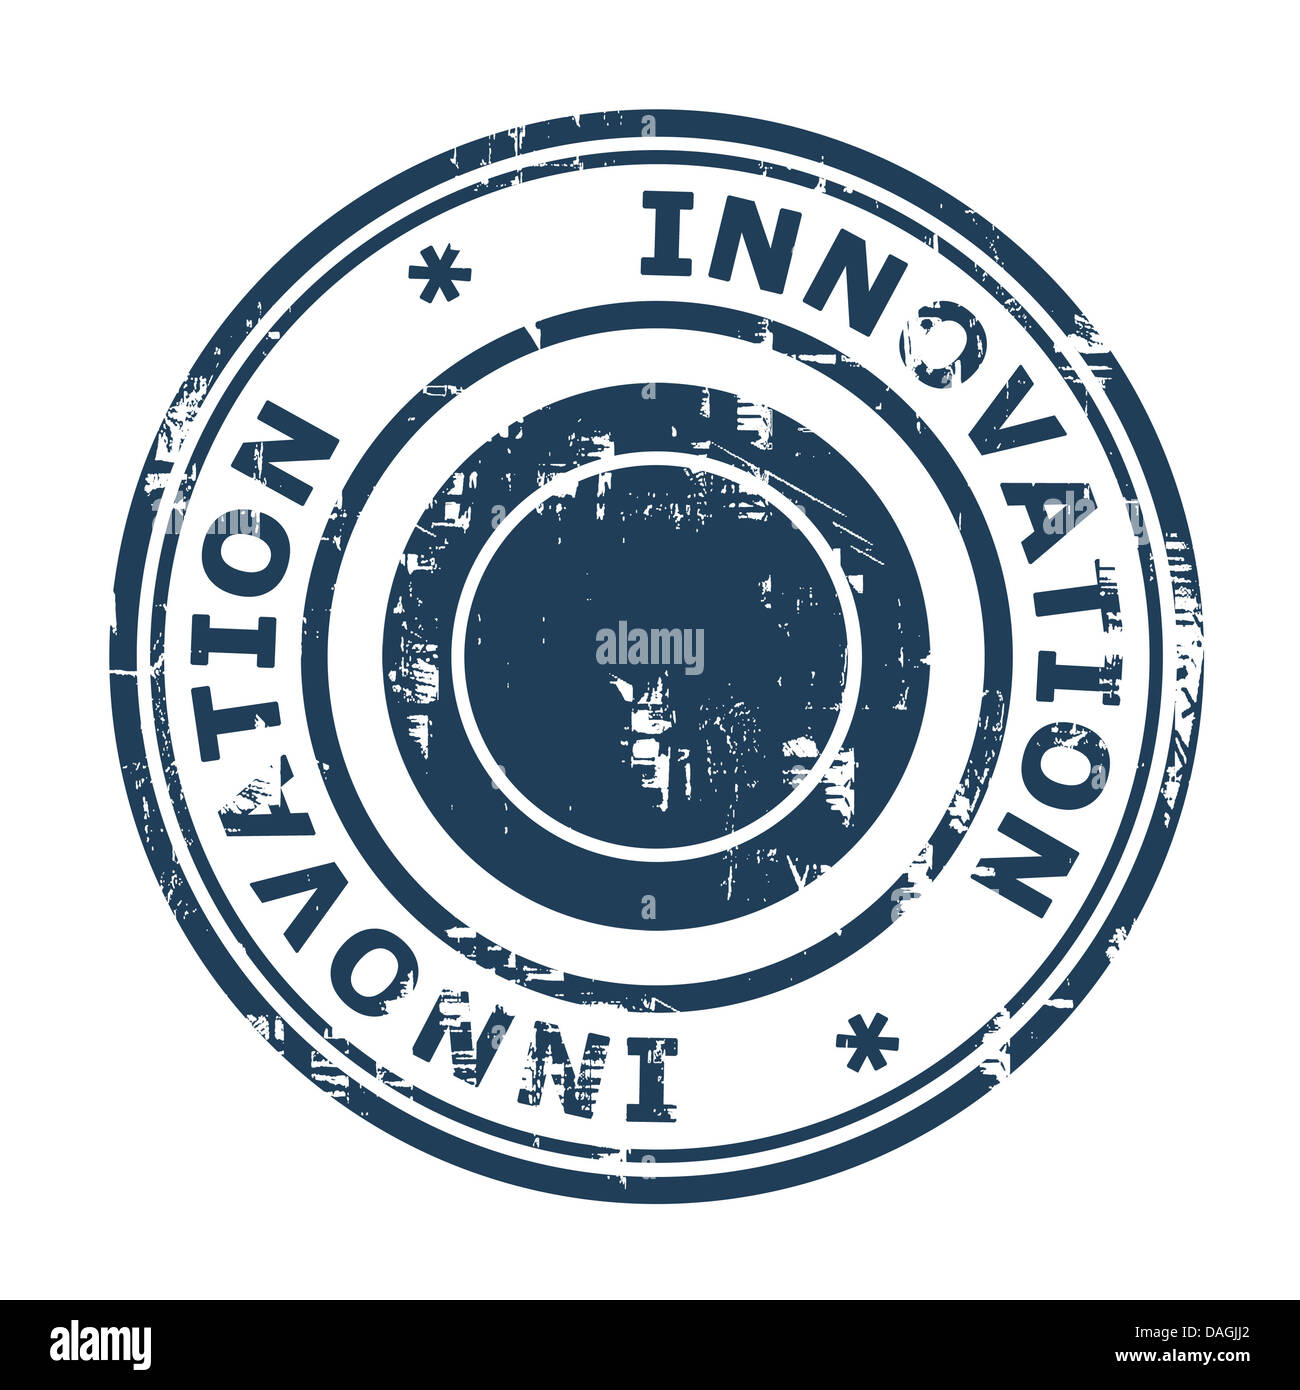 Business innovation concept stamp isolated on a white background. Stock Photo